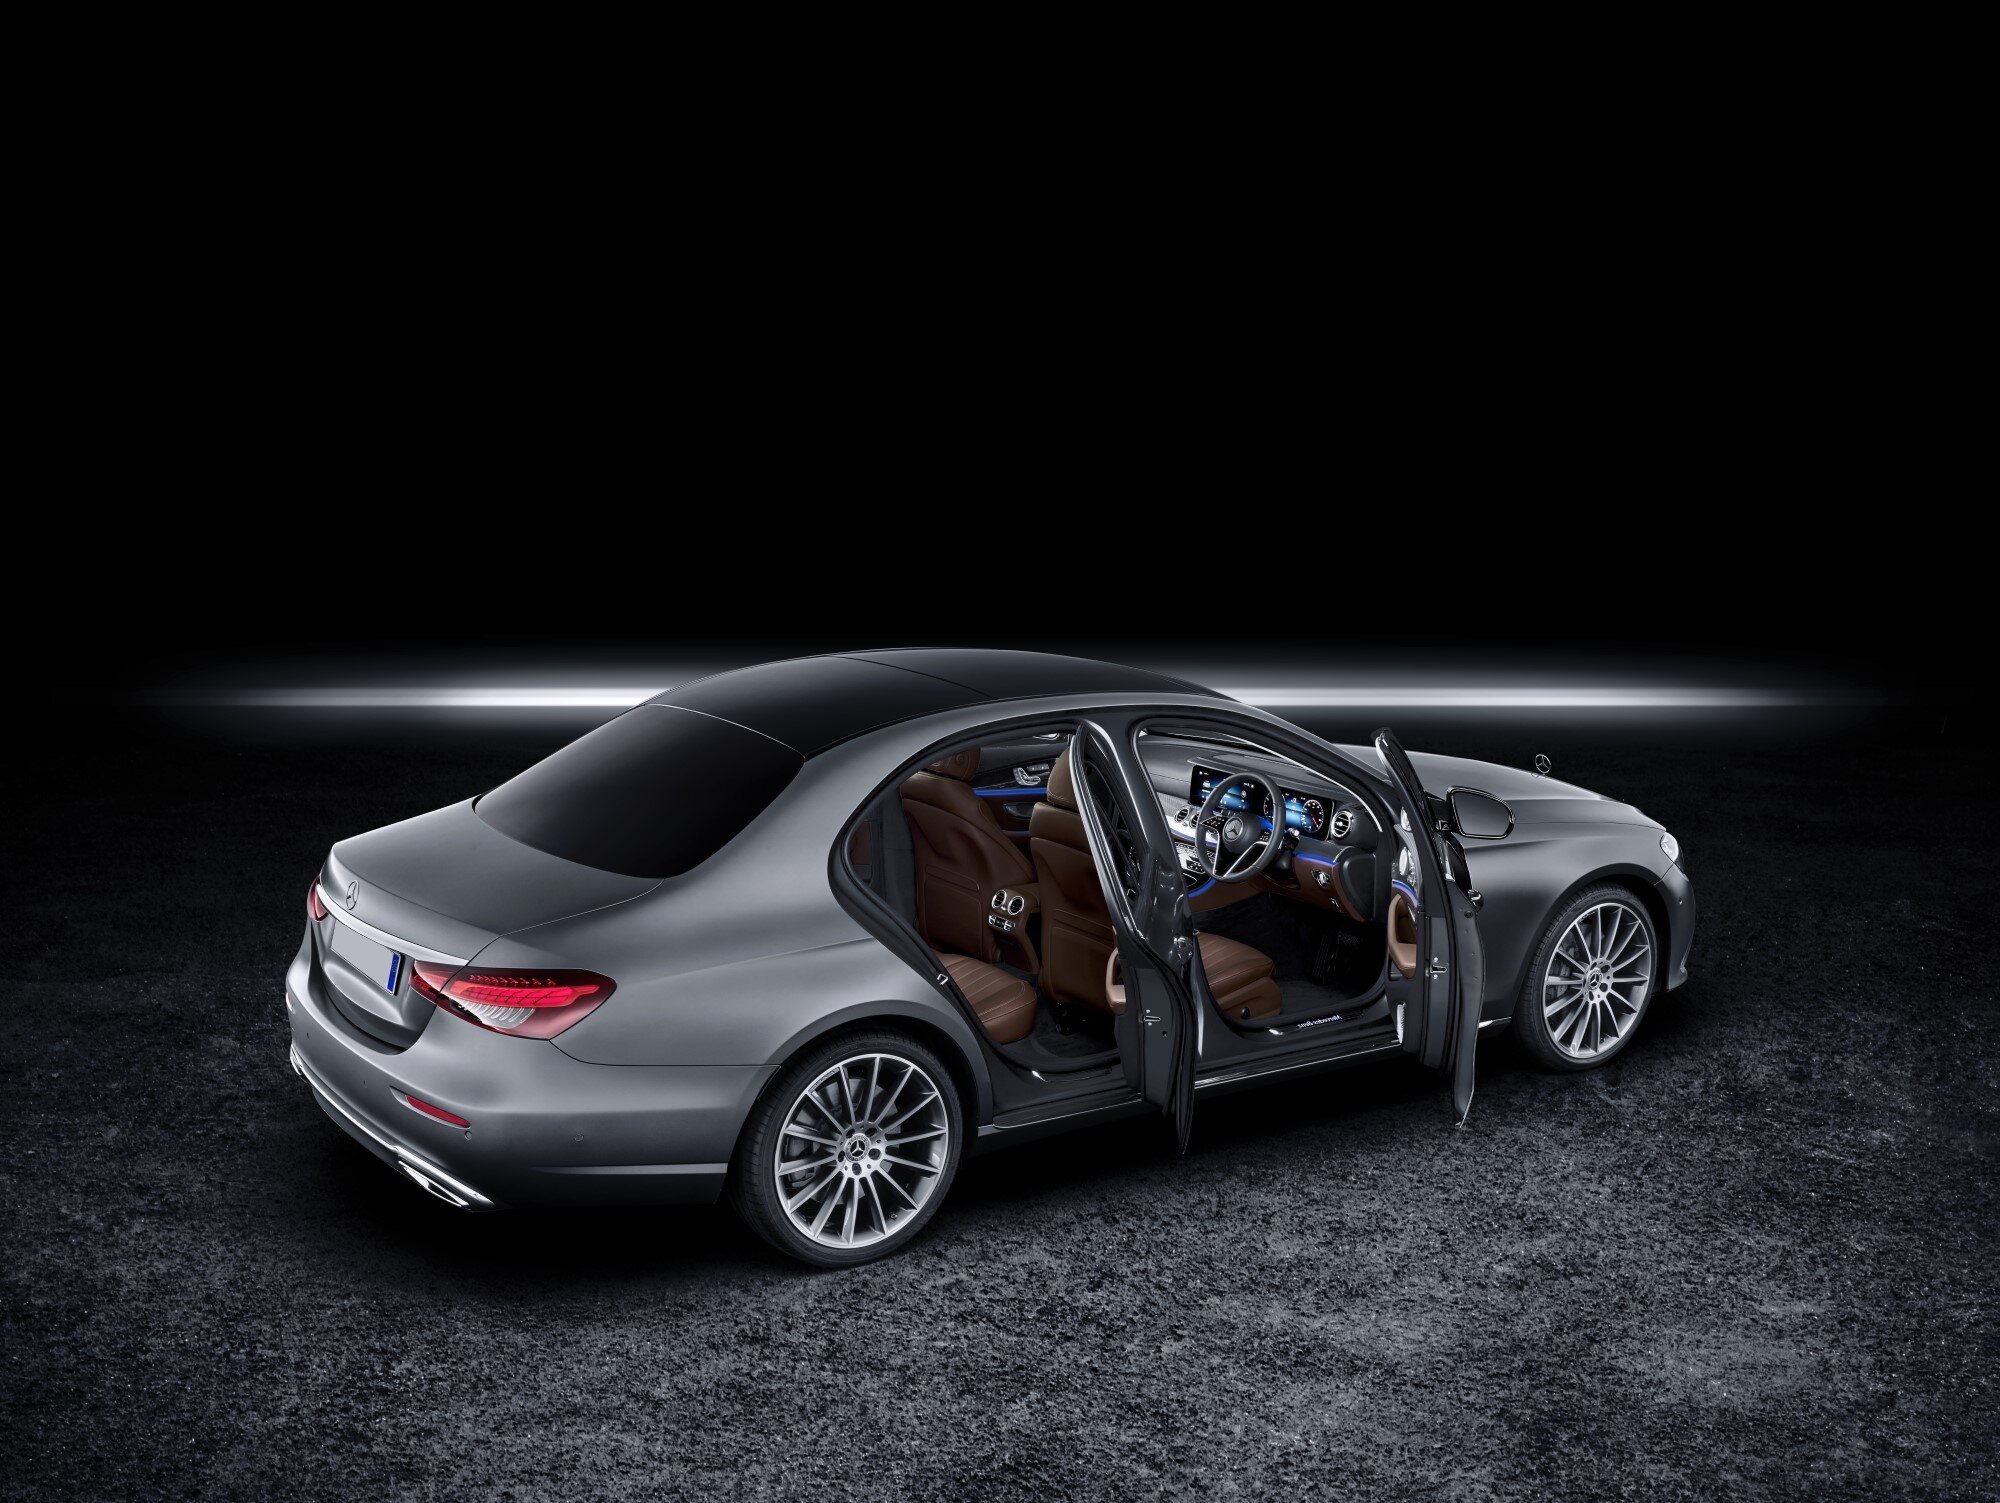 e-class-interior-executive-travel-in-london-with-driver.jpg